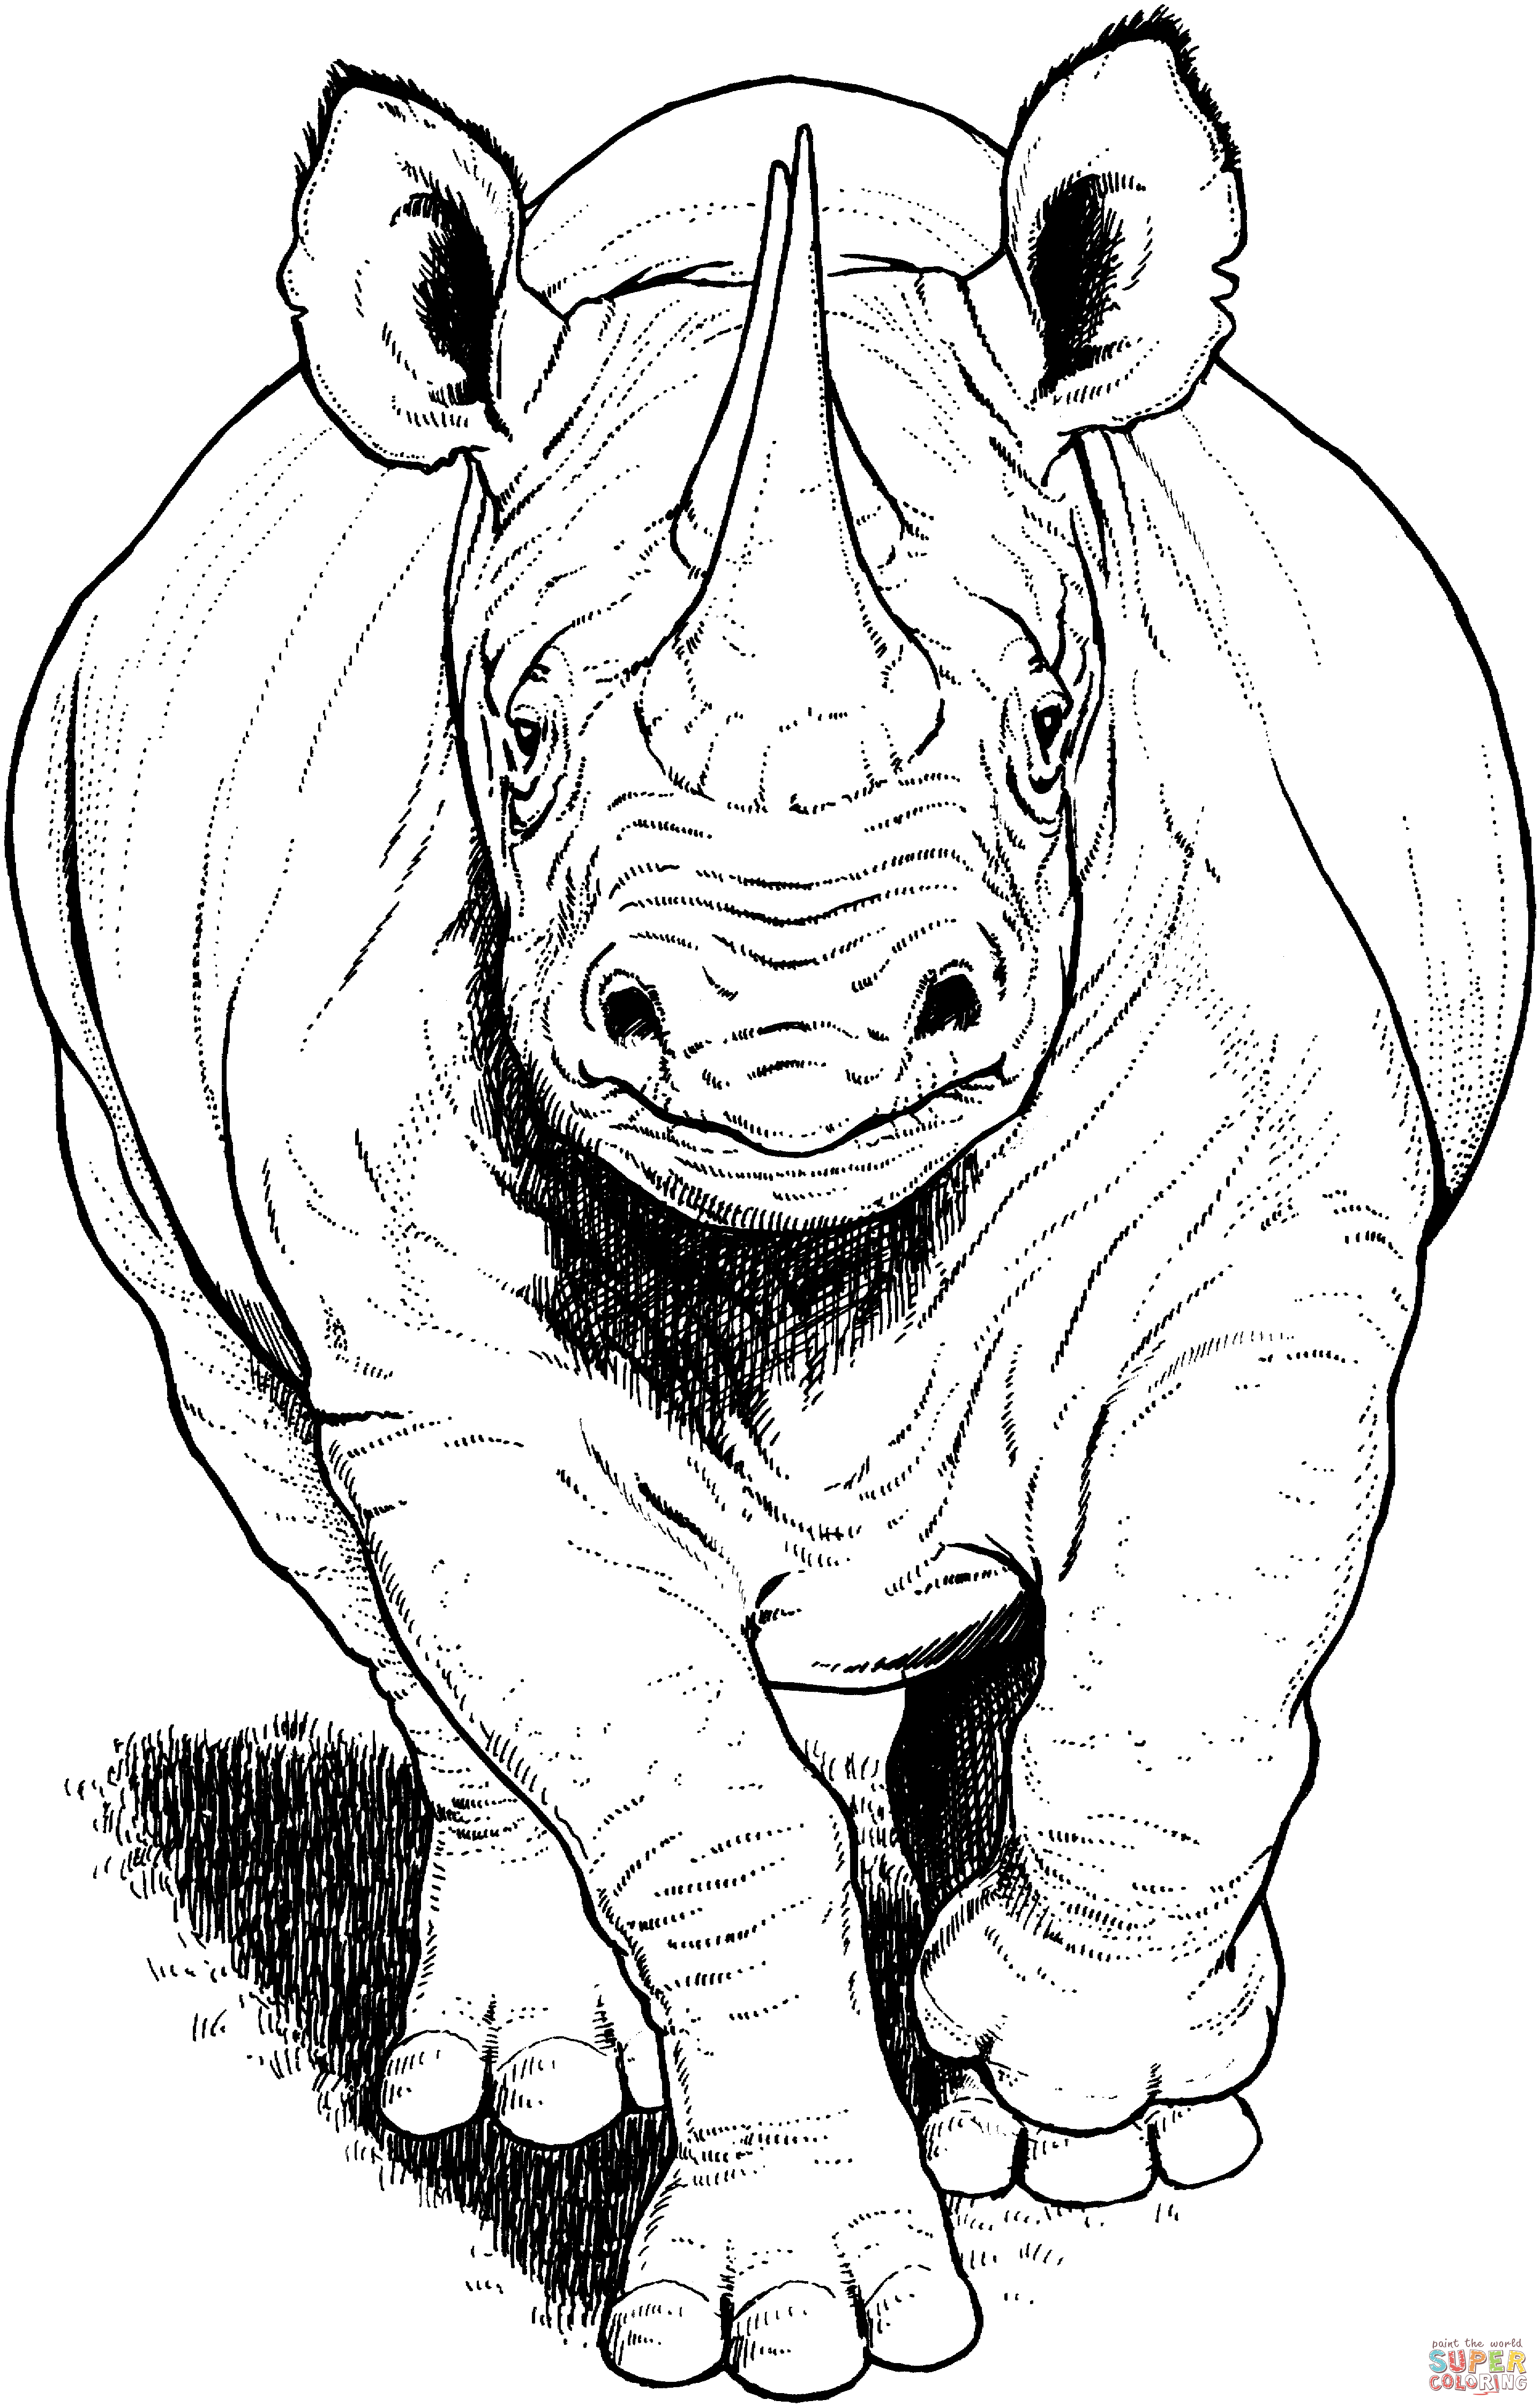 Black Rhino Running coloring page | Free Printable Coloring Pages